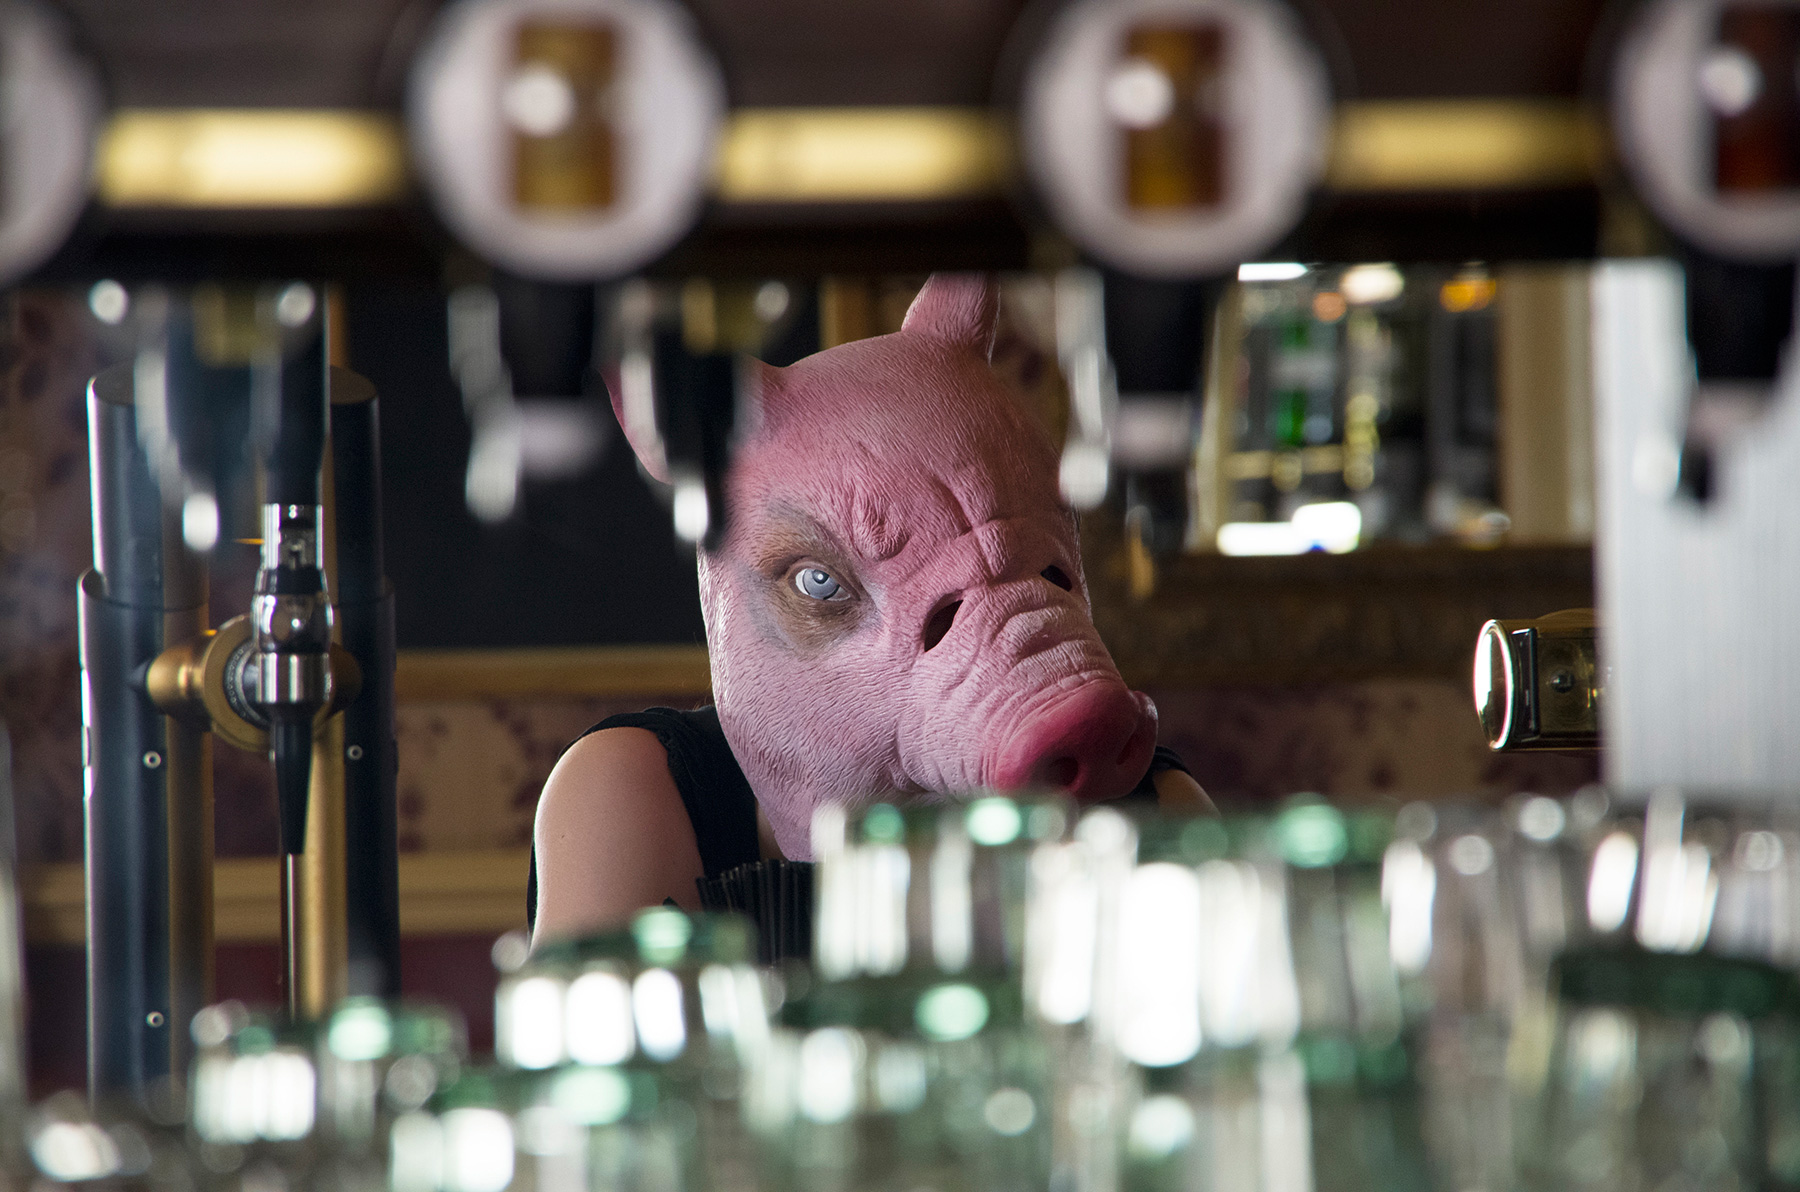 Beast - person wearing pig mask looking in pub mirror